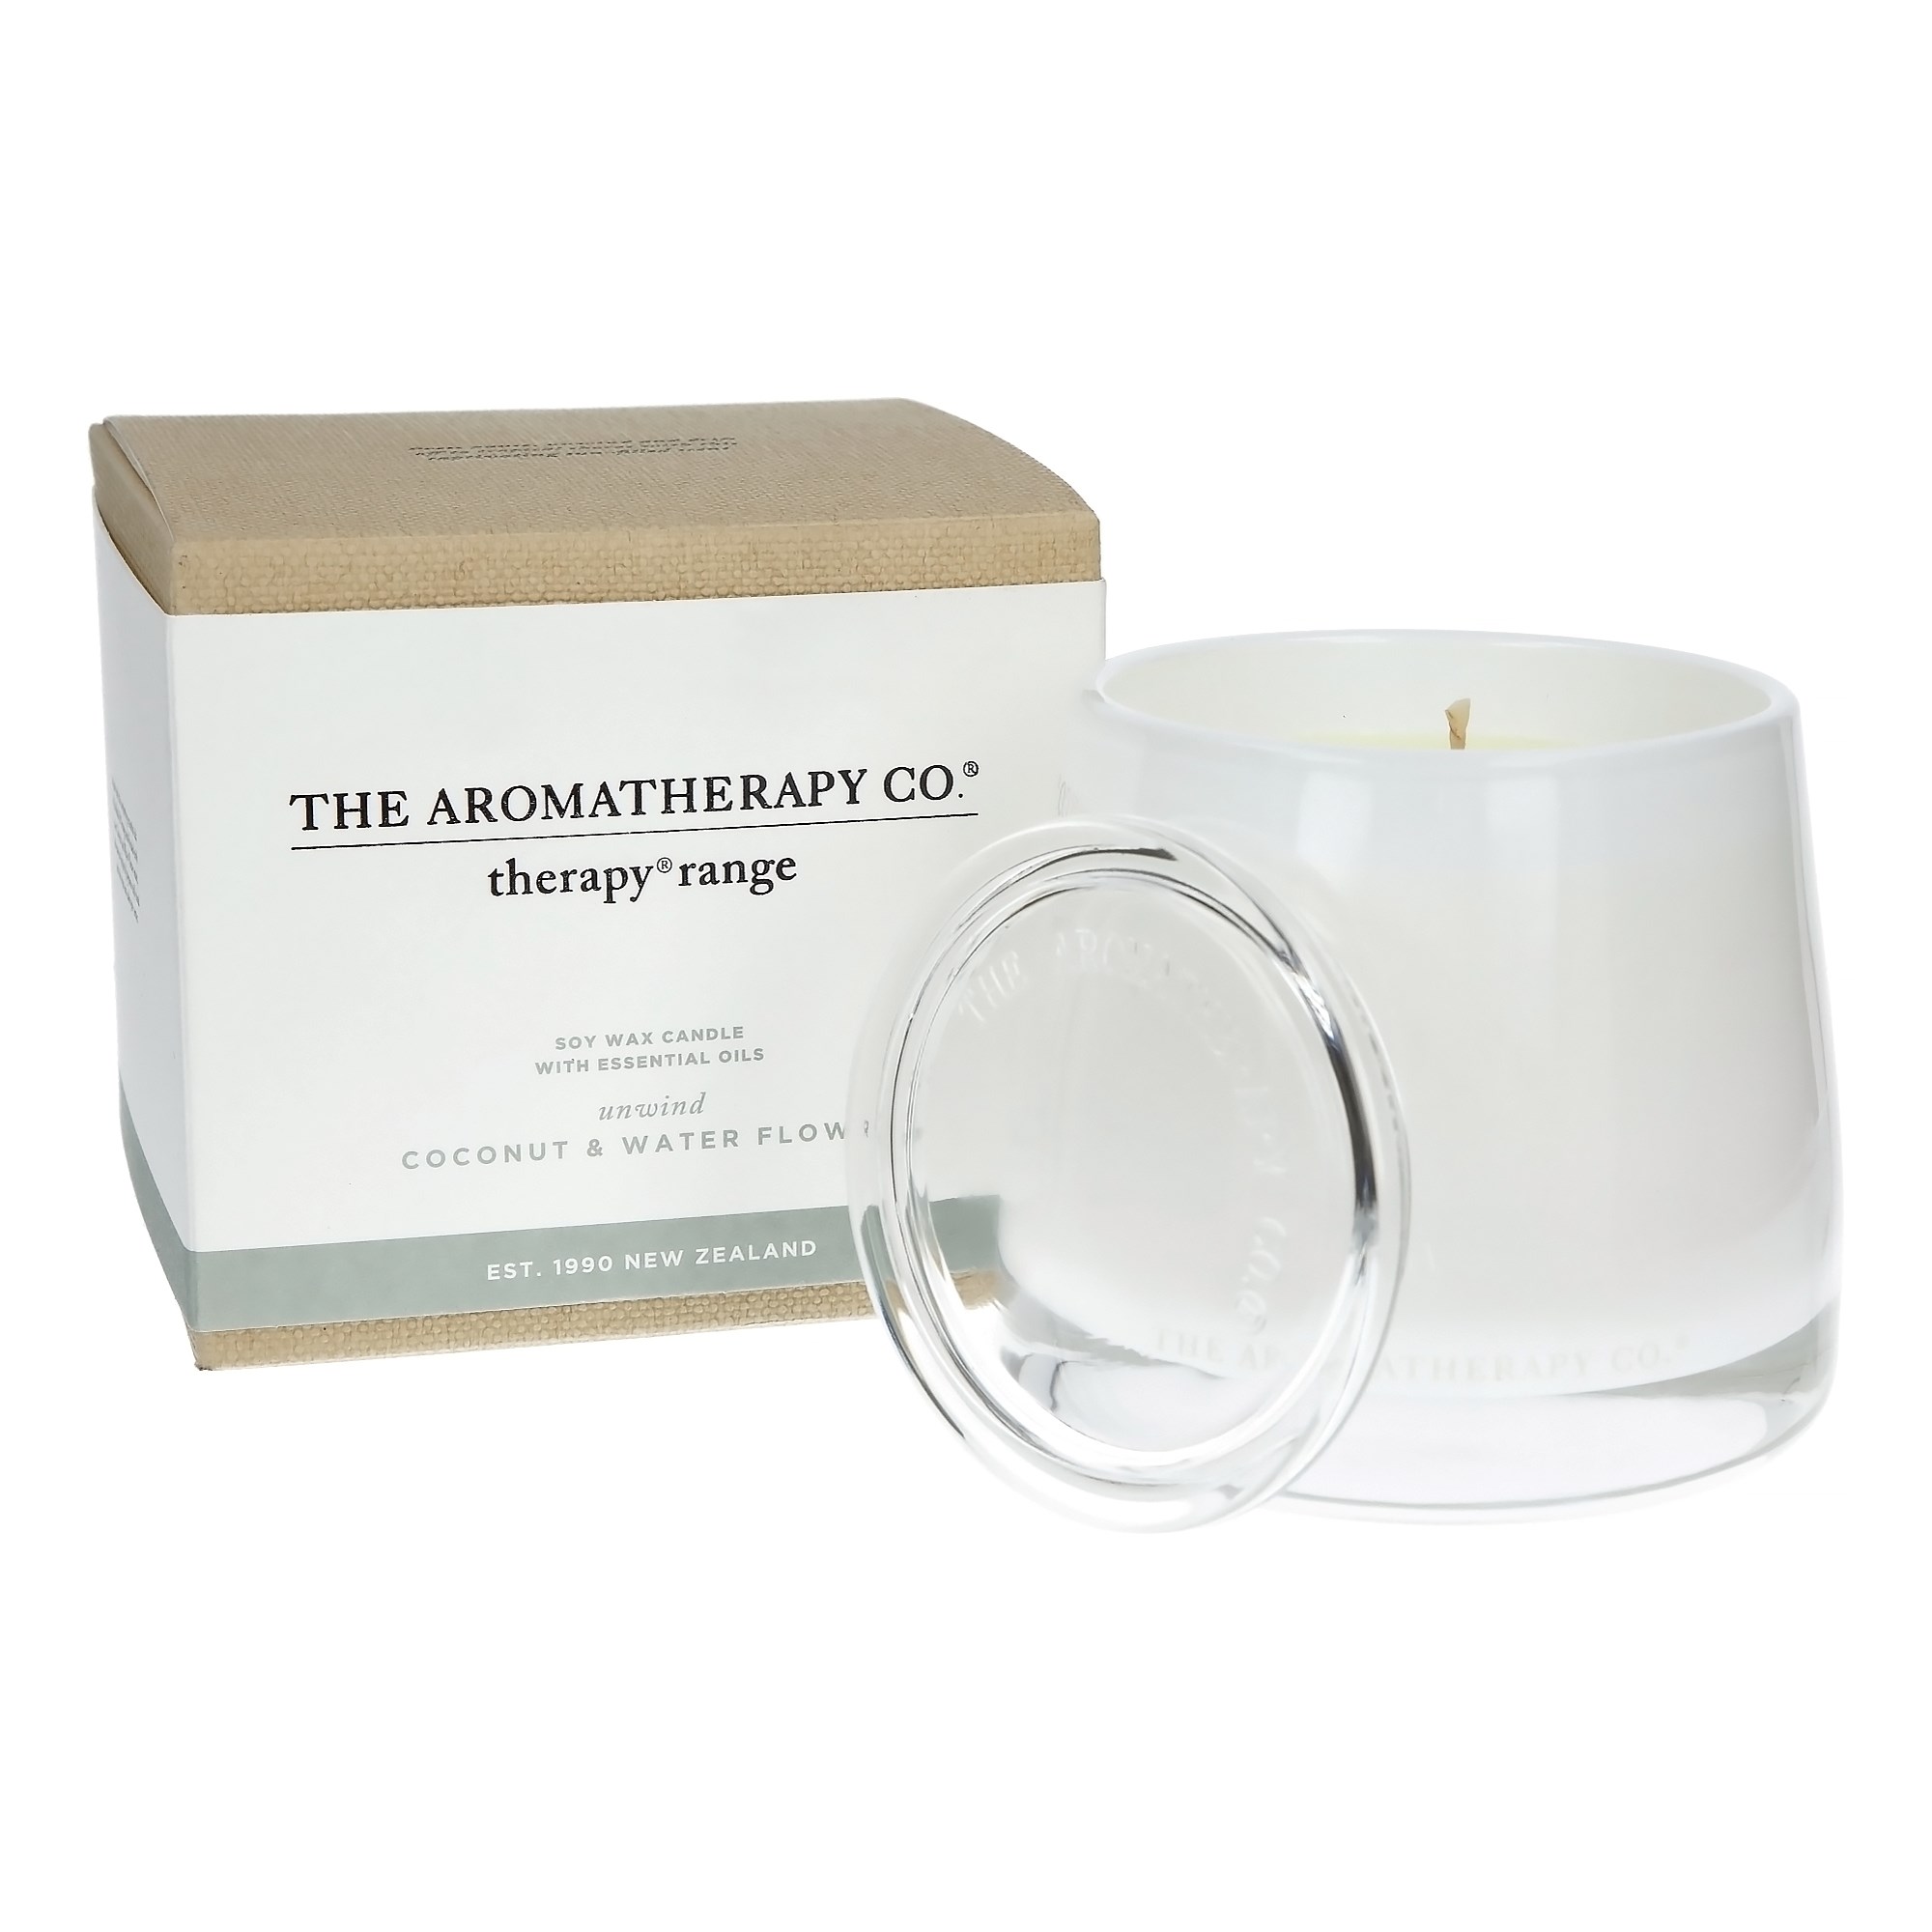 Läs mer om Therapy Range Sandalwood & Cedar Therapy Range Therapy Candle Coconut